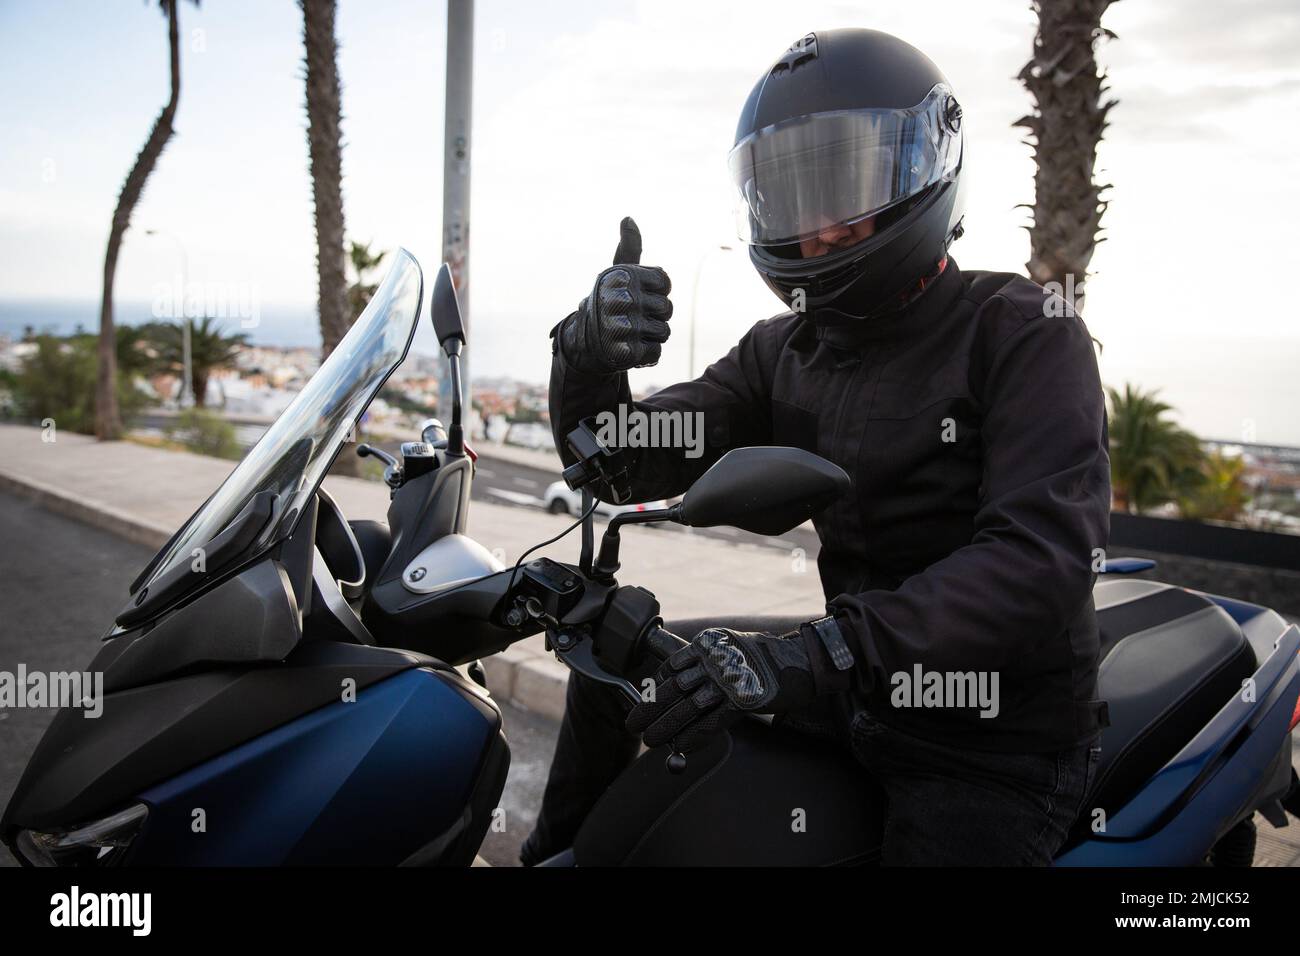 A motorcyclist on his motorcycle gives the thumbs up, happy motorcycle enthusiast. Stock Photo